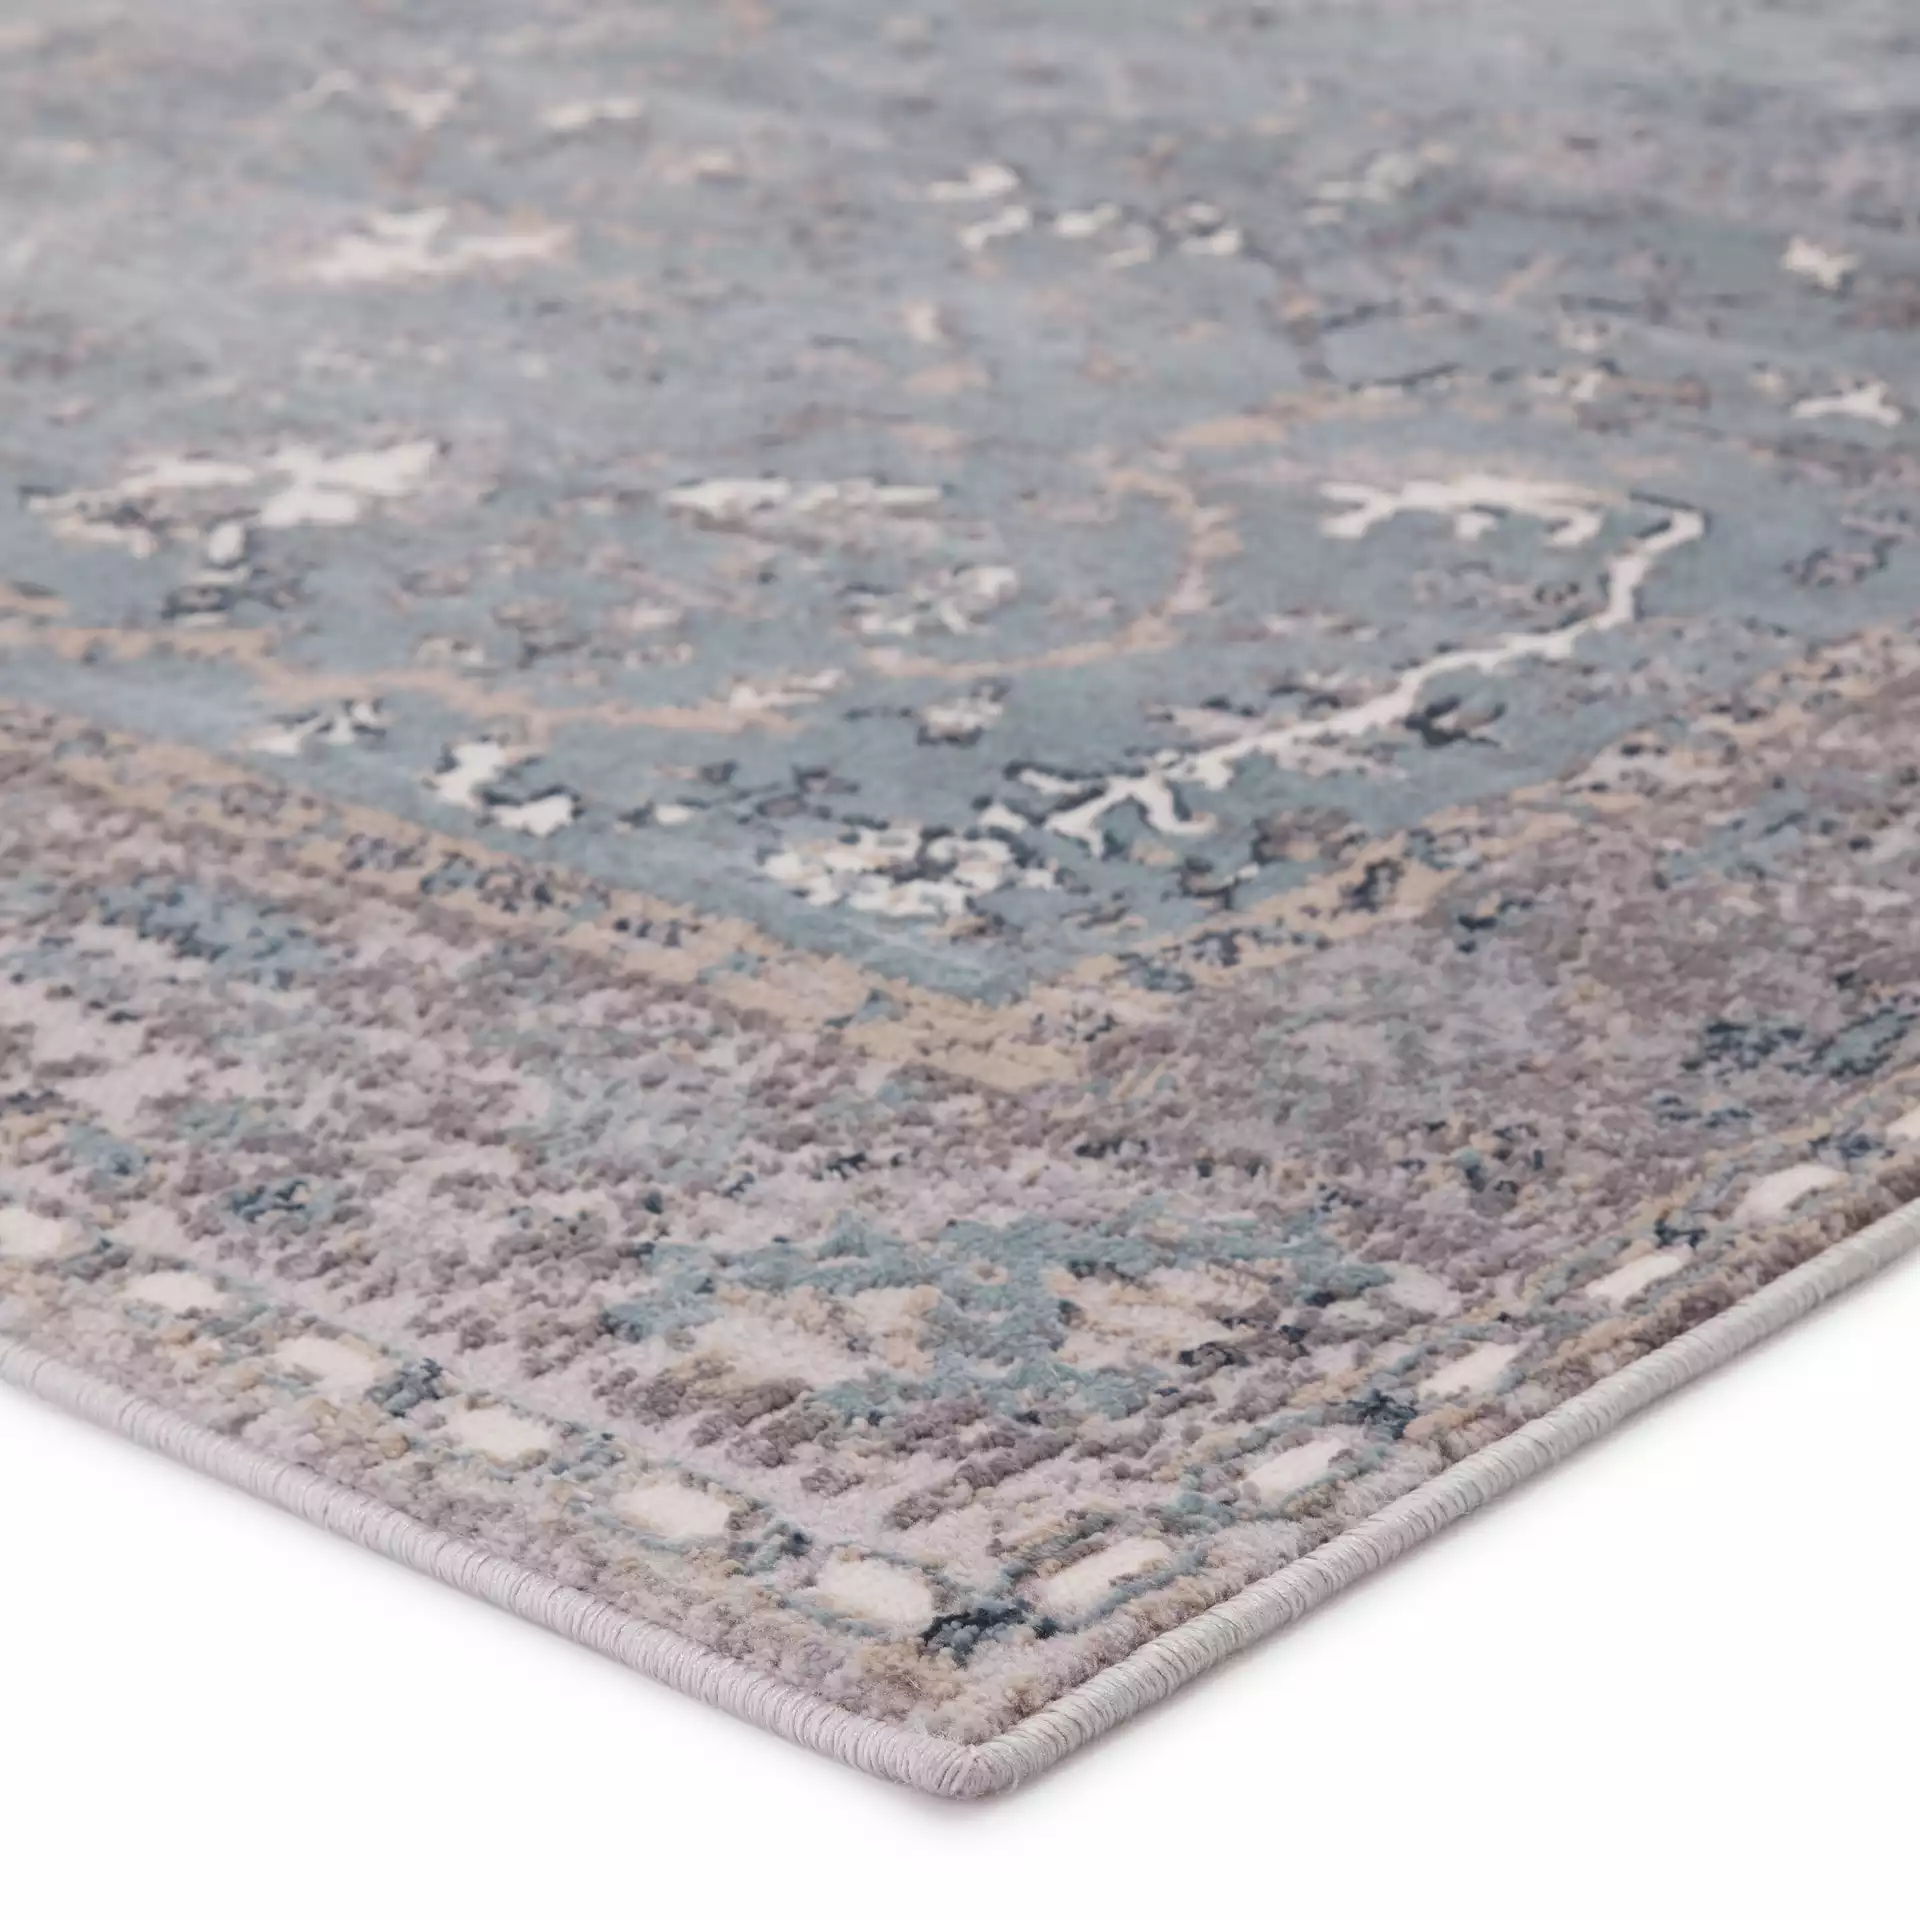 Vibe by Yule Oriental Blue/ Gray Area Rug (9'X13')